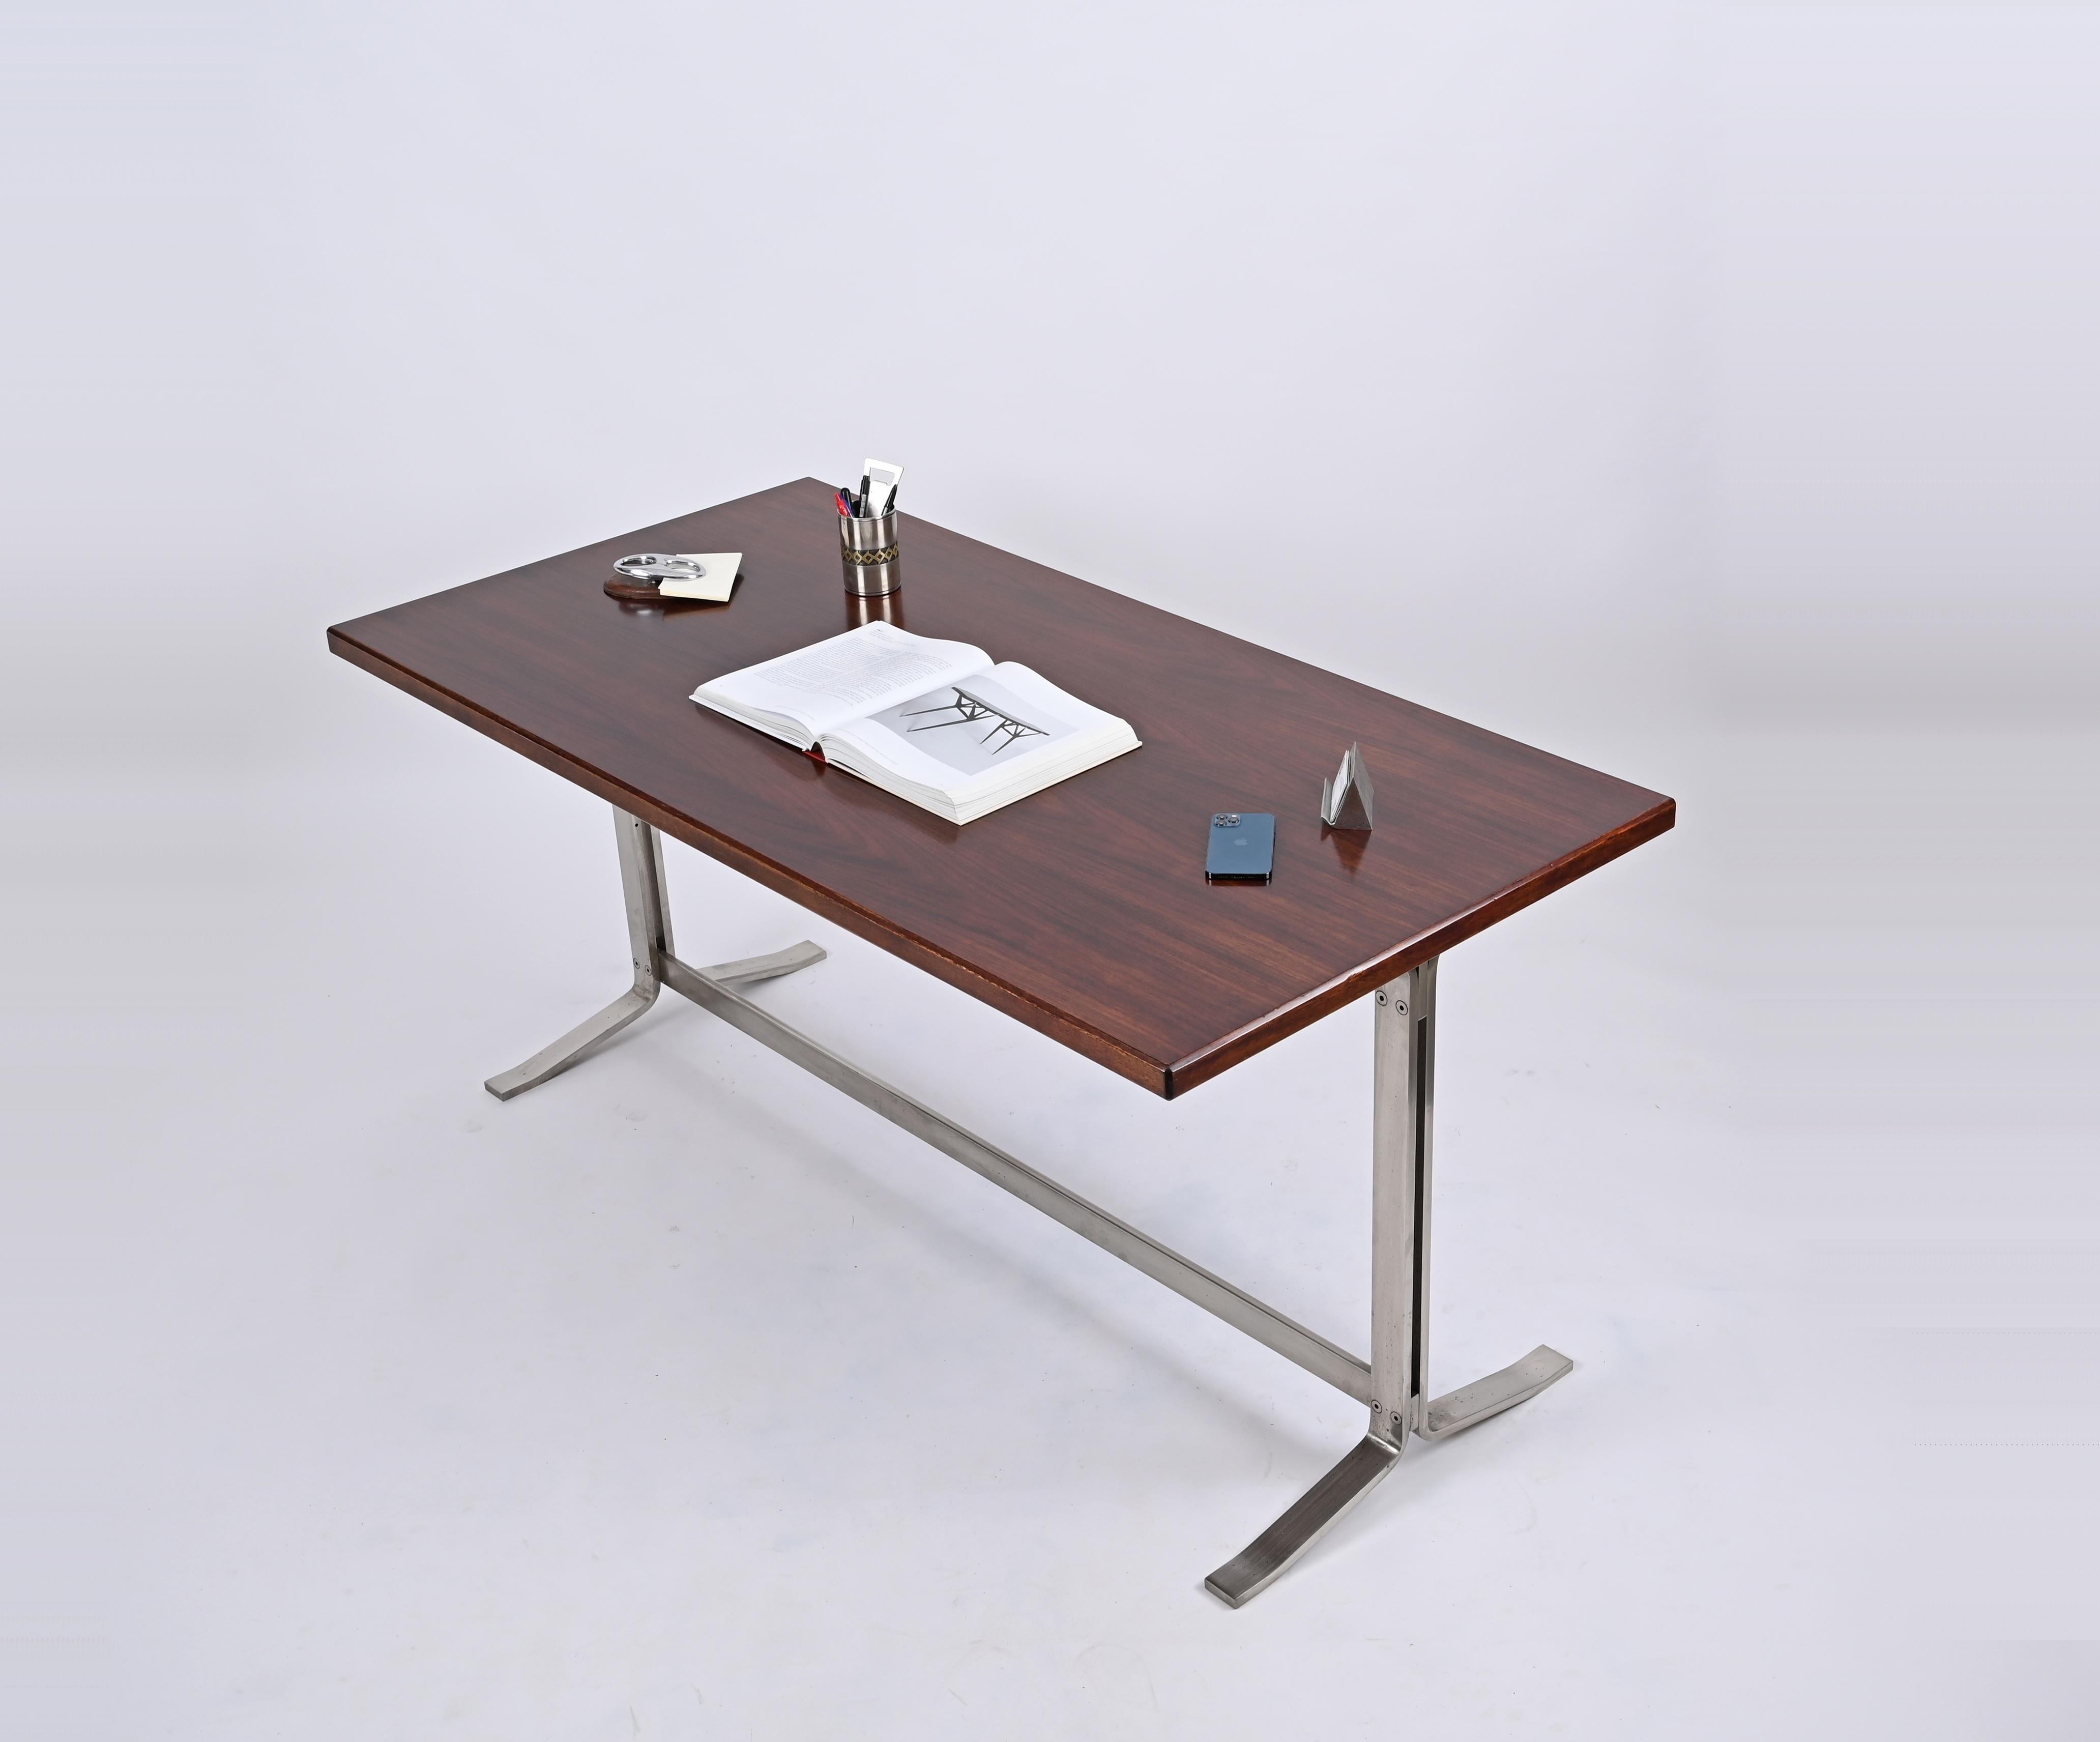 Hand-Crafted Midcentury Desk in Walnut and Steel by Moscatelli for Formanova, Italy, 1965 For Sale